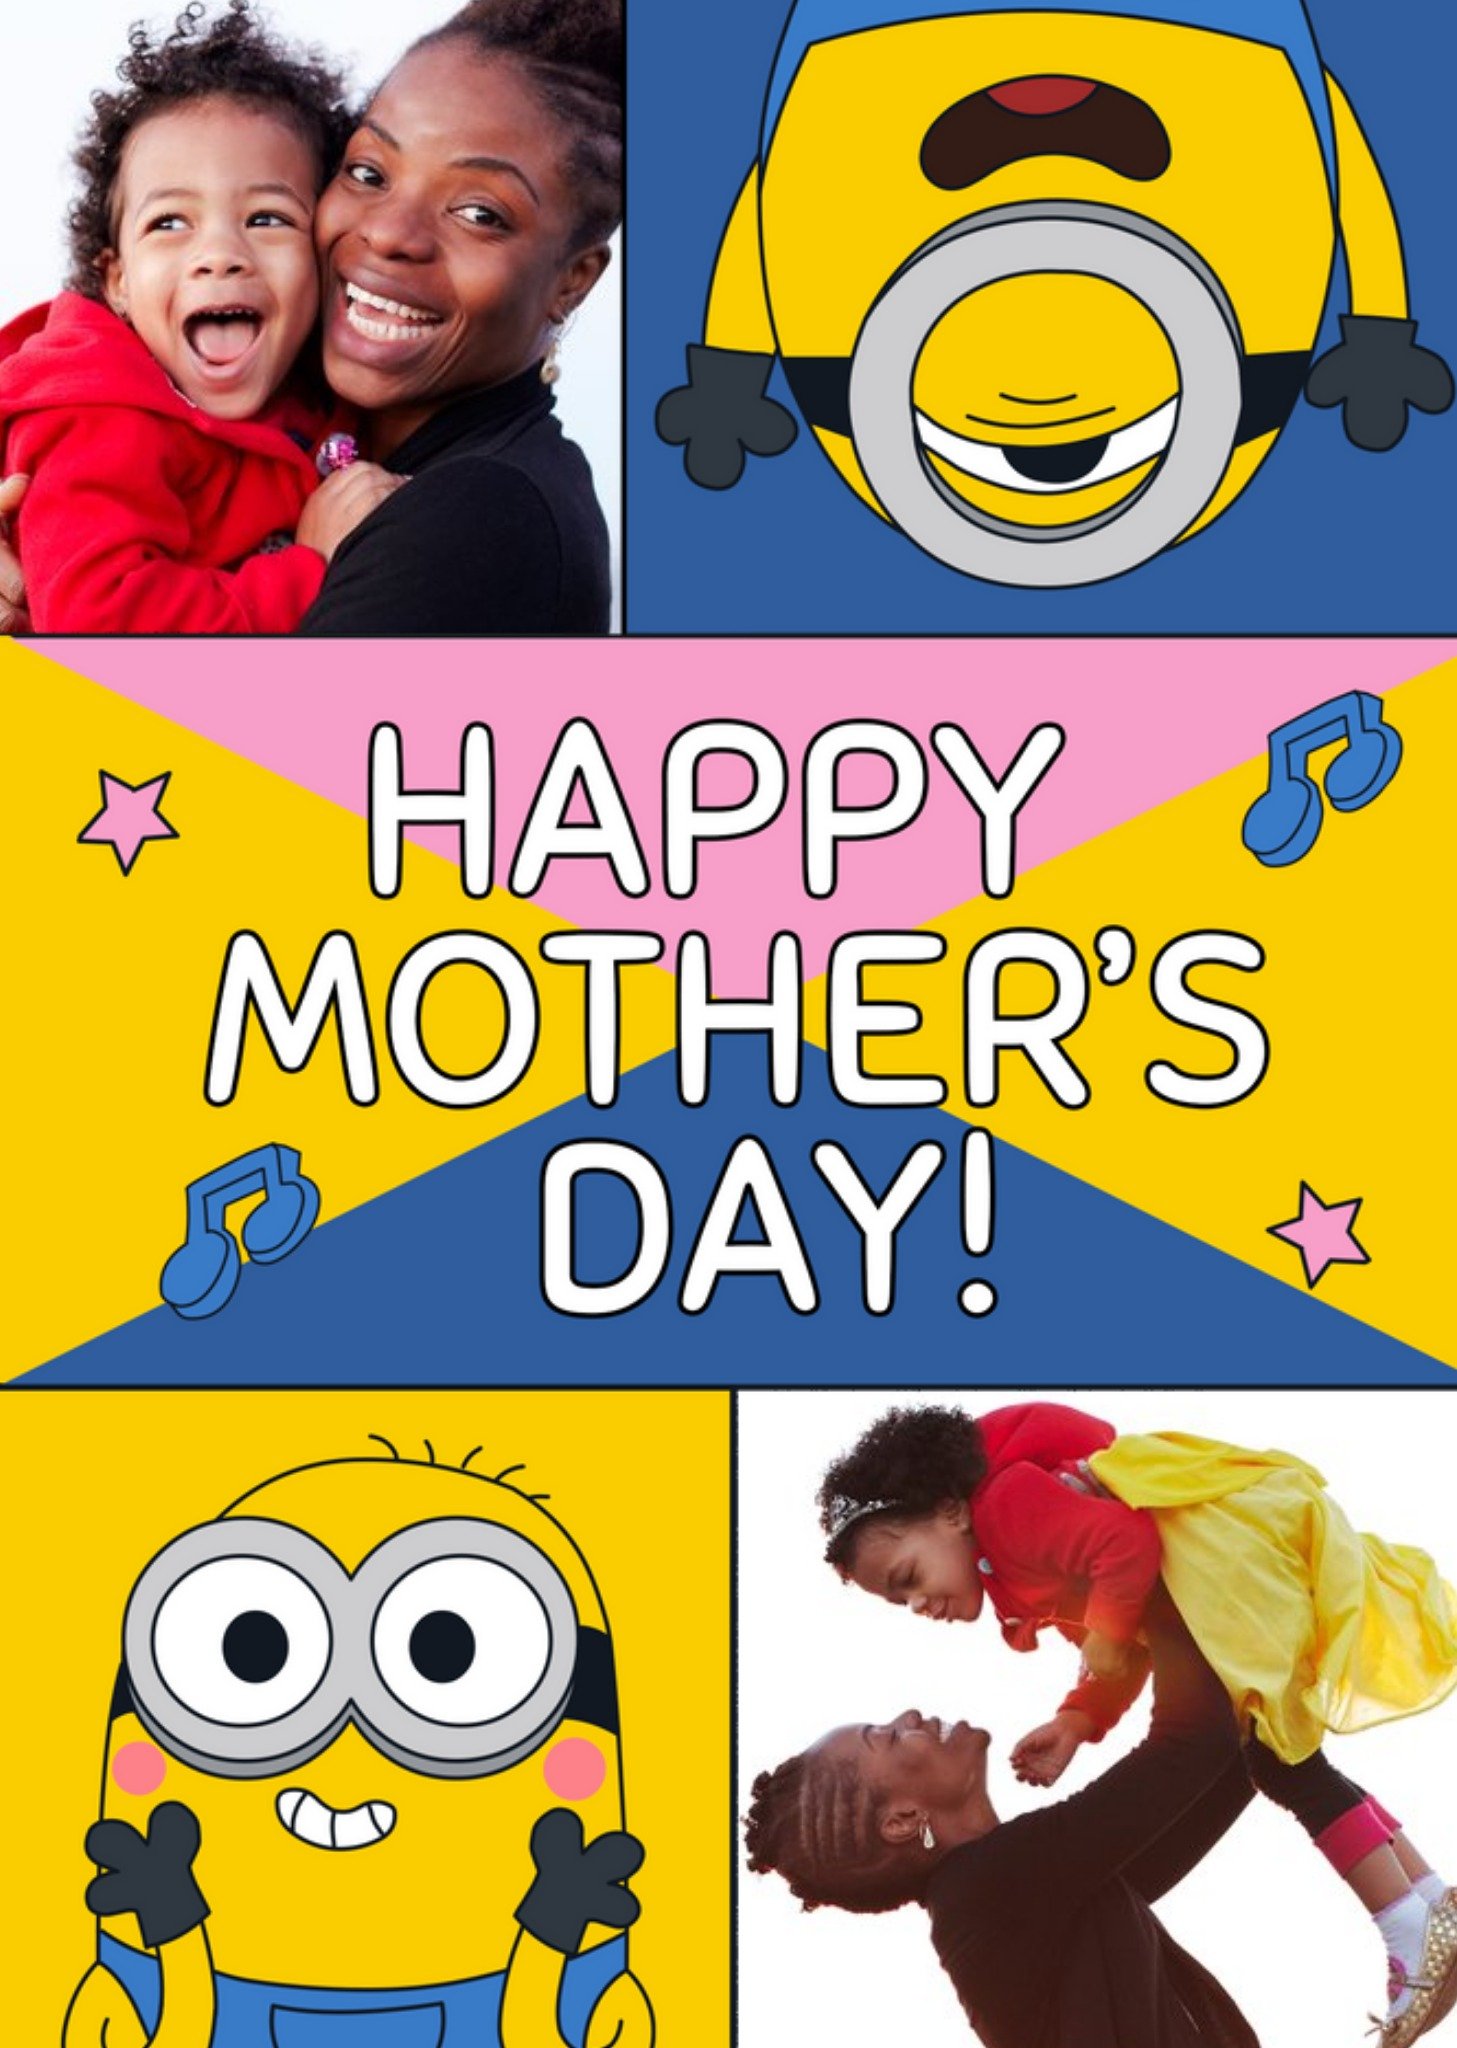 Despicable Me Despicable Photo Upload Mother's Day Card Ecard